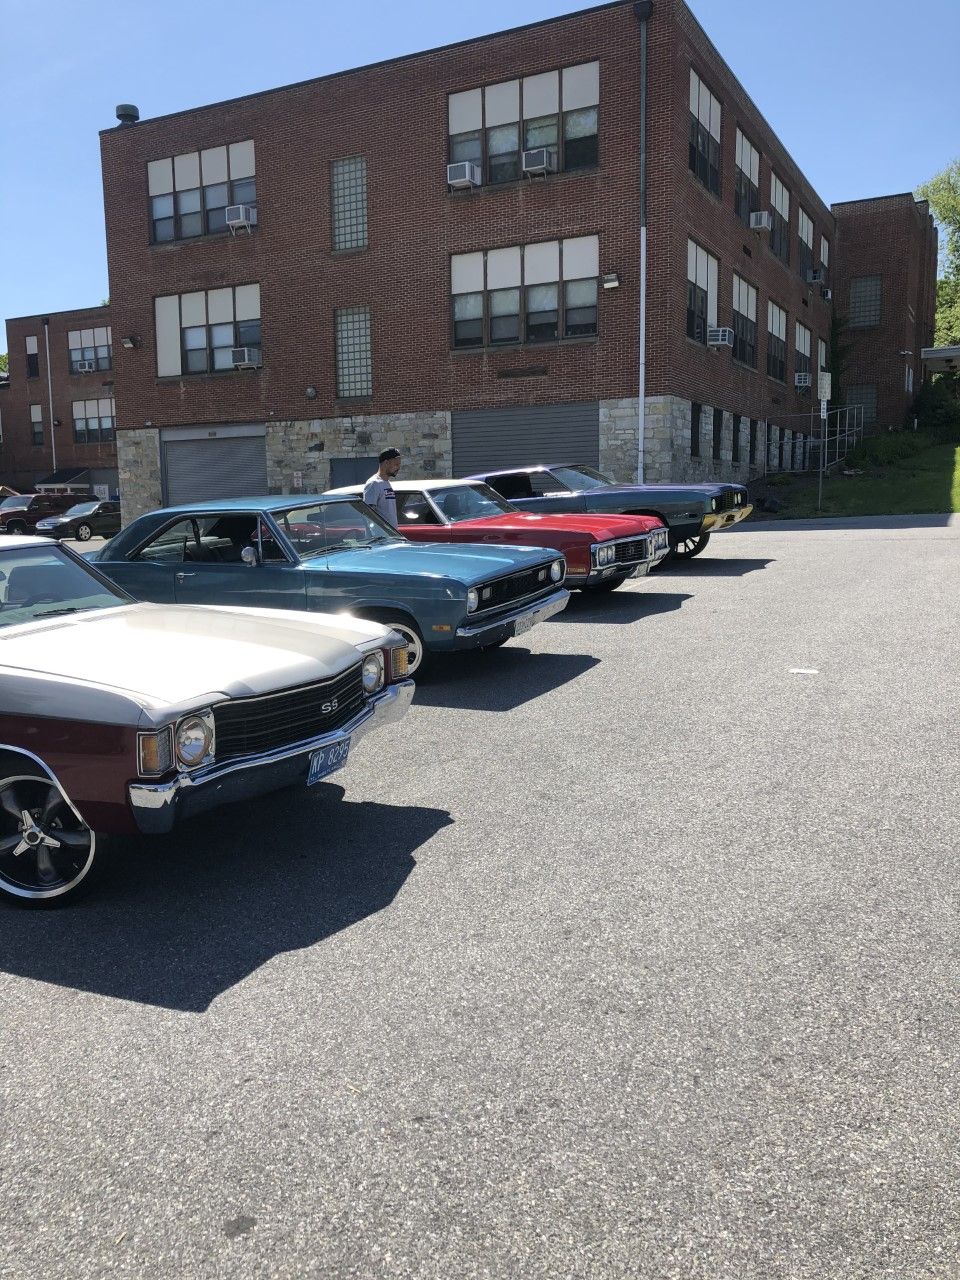 Road Knights of Hagerstown\u2019s 3rd Annual Classic Car Show